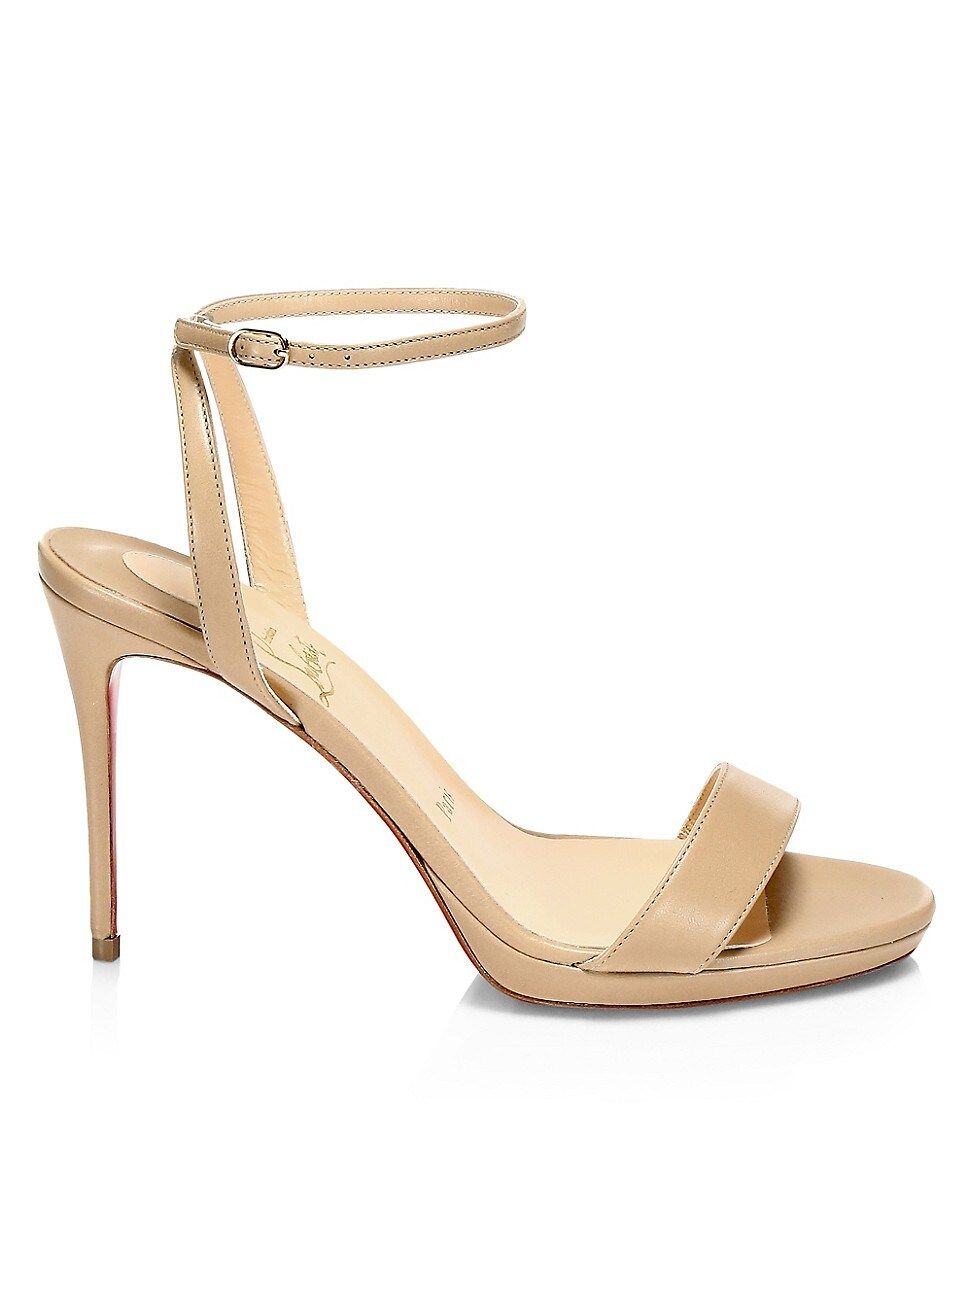 Christian Louboutin Women's Loubi Queen Leather Ankle-Strap Sandals - Nude - Size 42 (12) | Saks Fifth Avenue